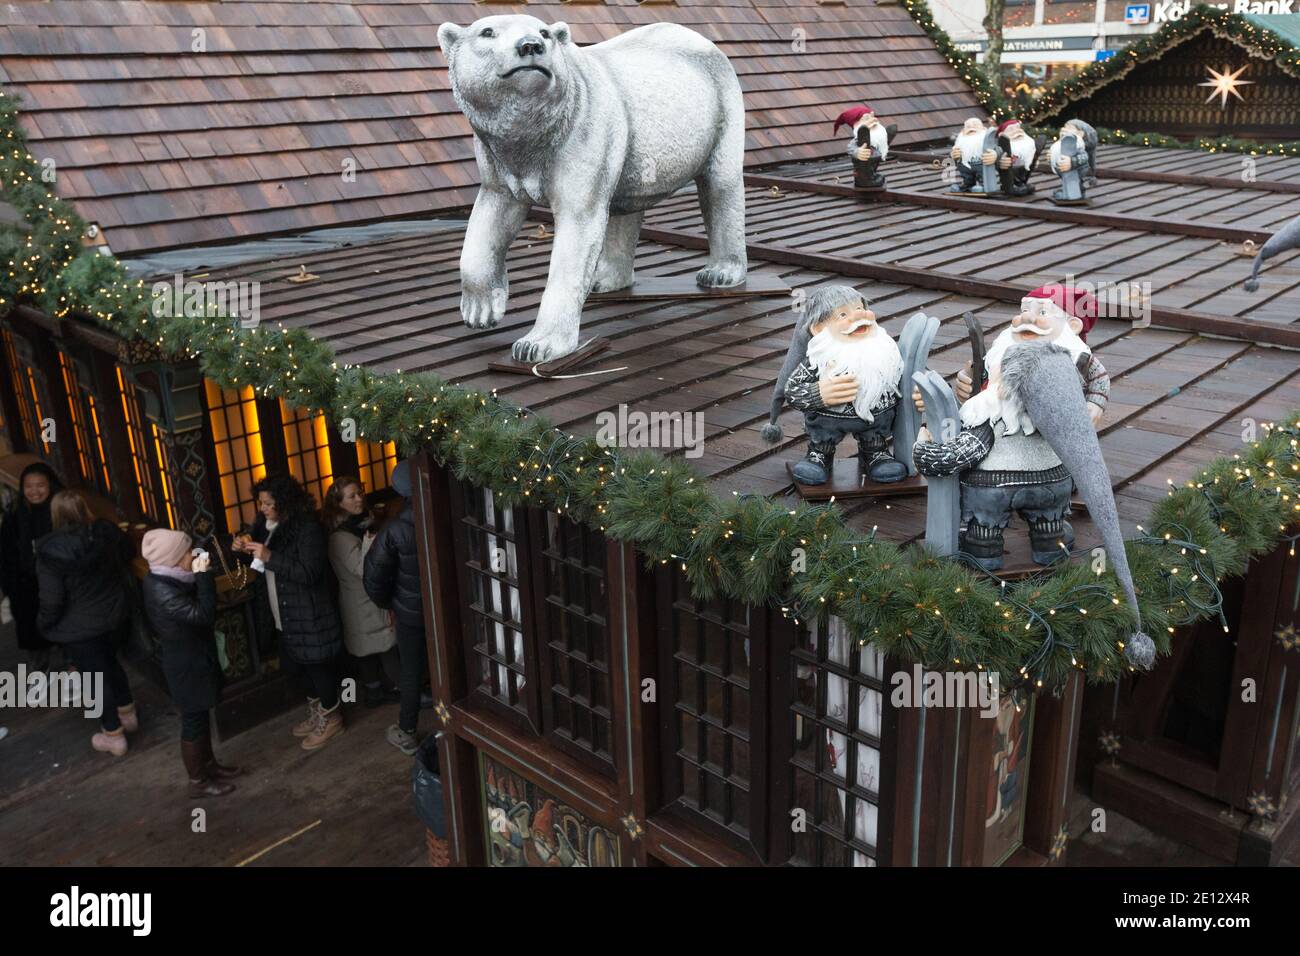 A polar bear and gnomes watch over people drinking gluhwein or mulled wine the Christmas Market, or Weihnachtsmarkt in the historic Altstadt, or in th Stock Photo